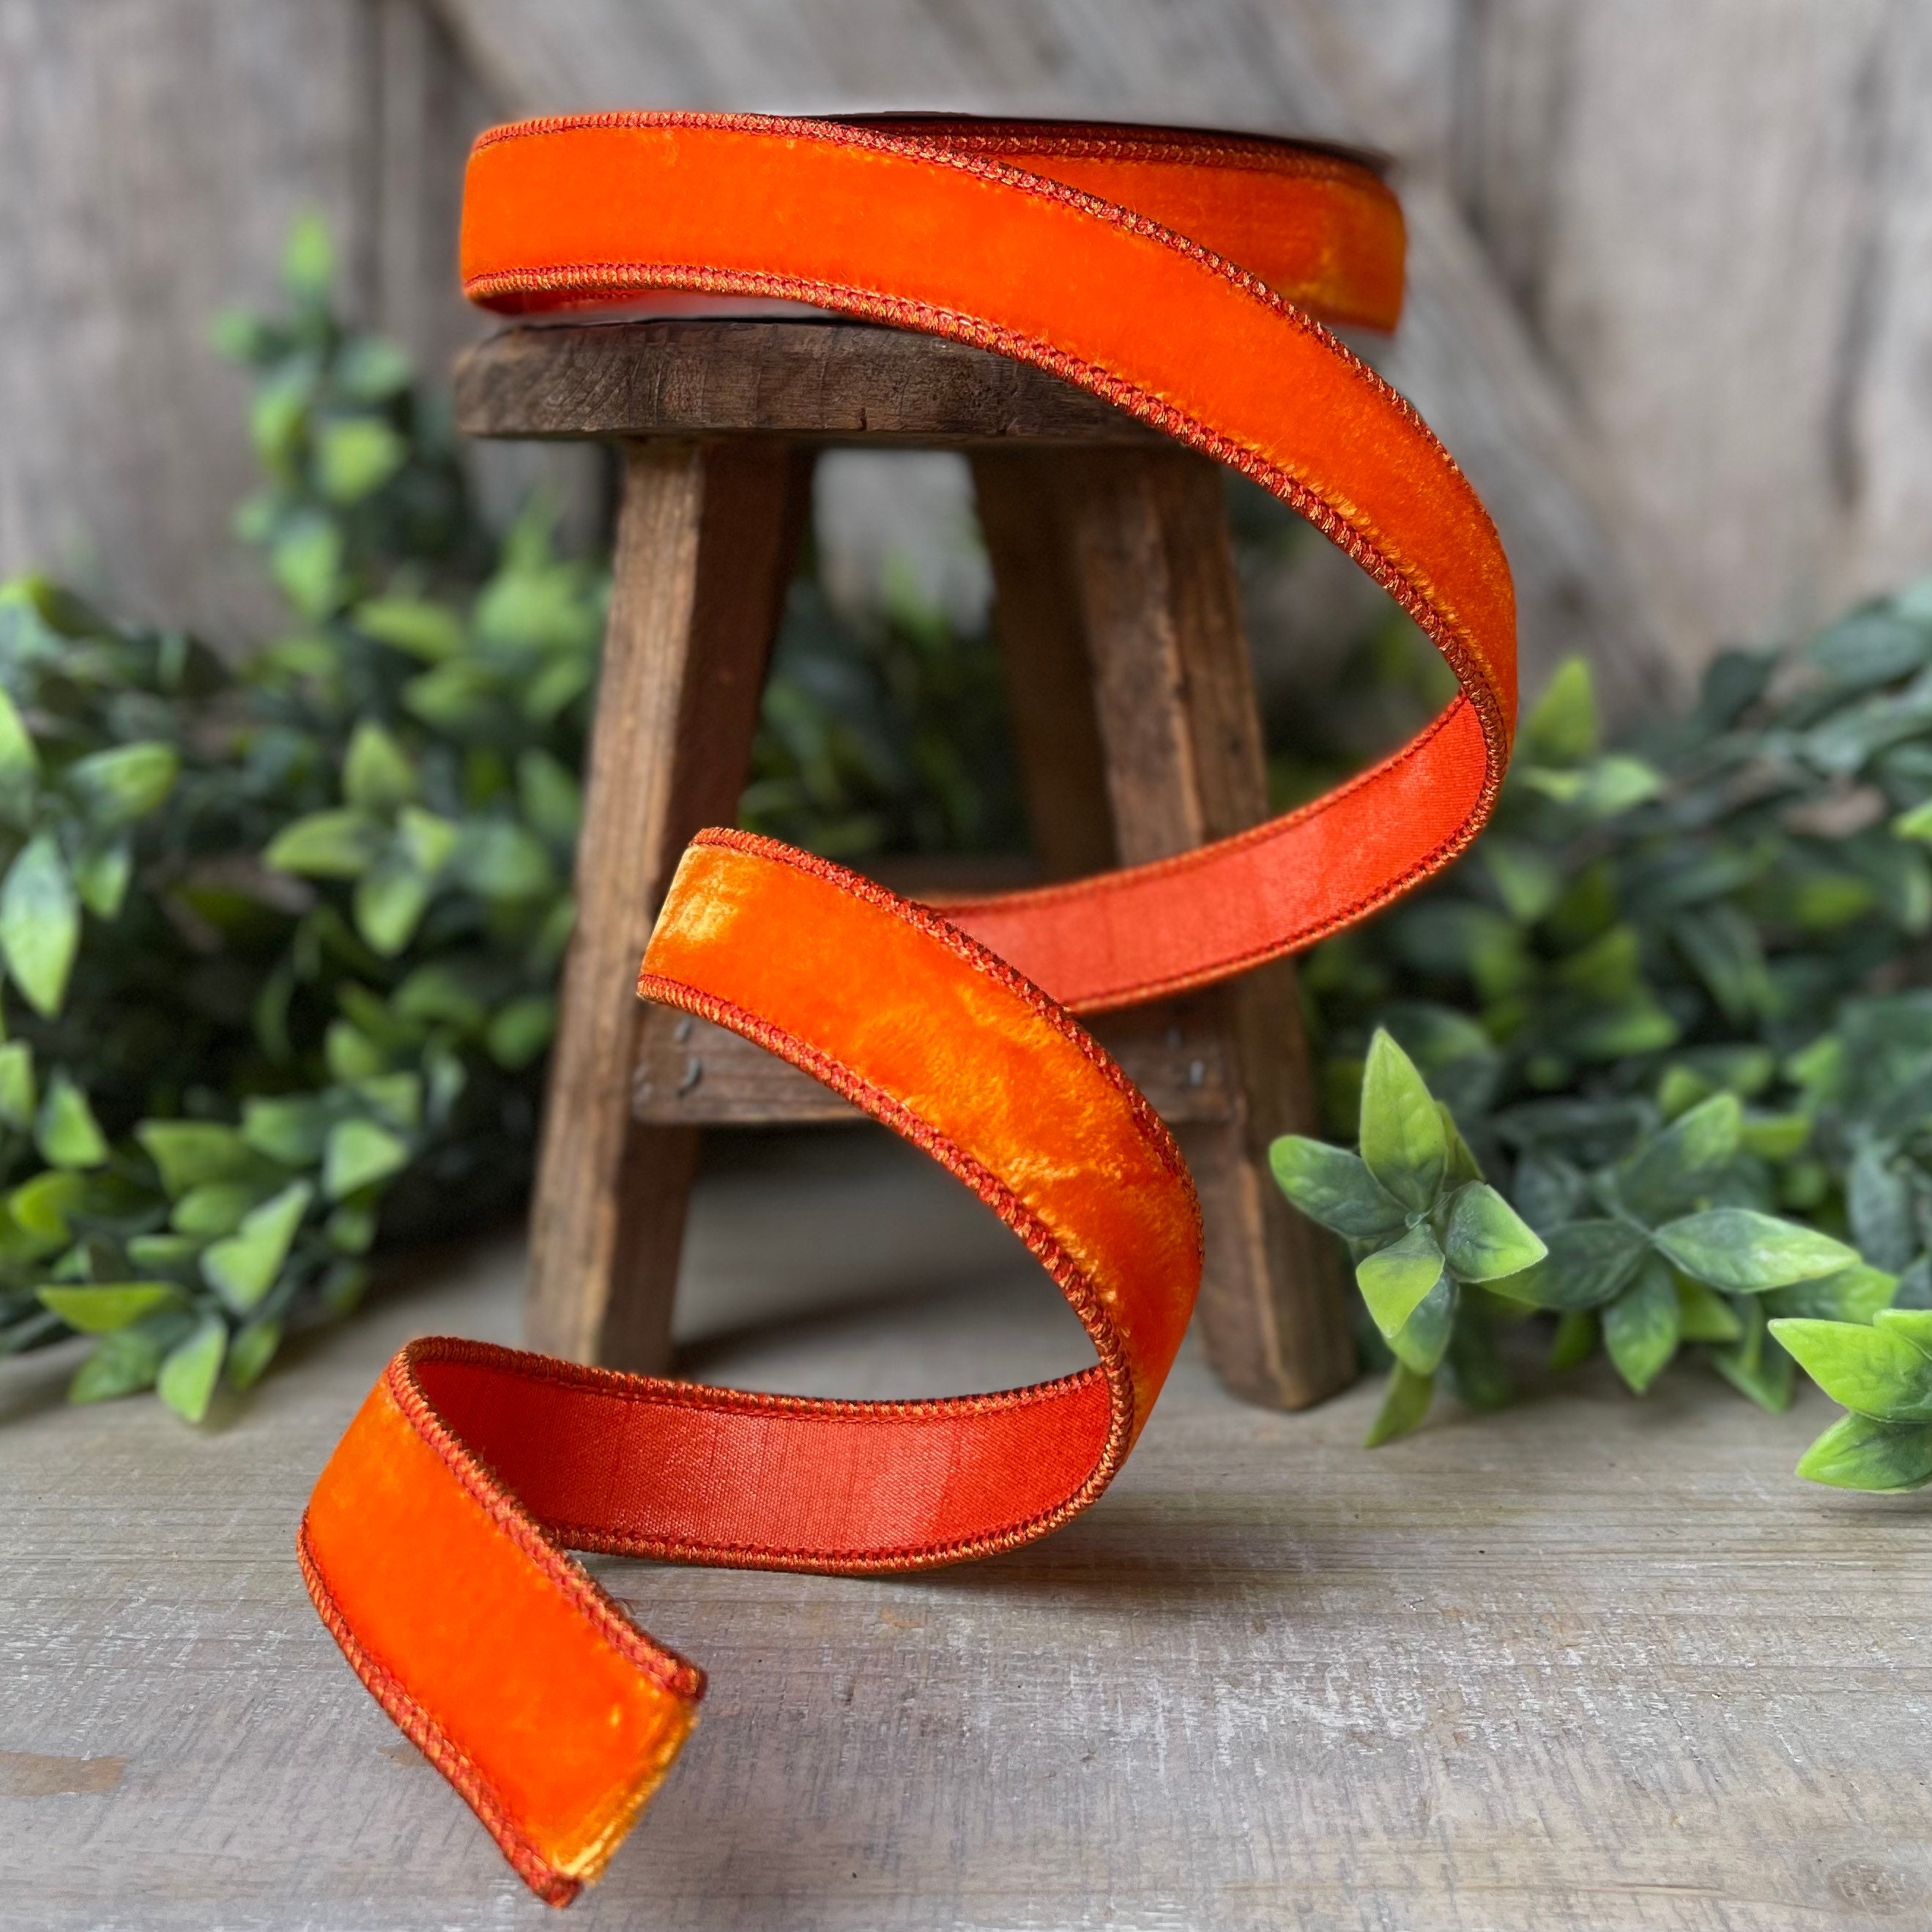 Orange Satin Awareness Ribbons, zosenda 50 Pcs Pre-Formed Orange Fabric  Ribbons with Safety Pins (Already Attached)